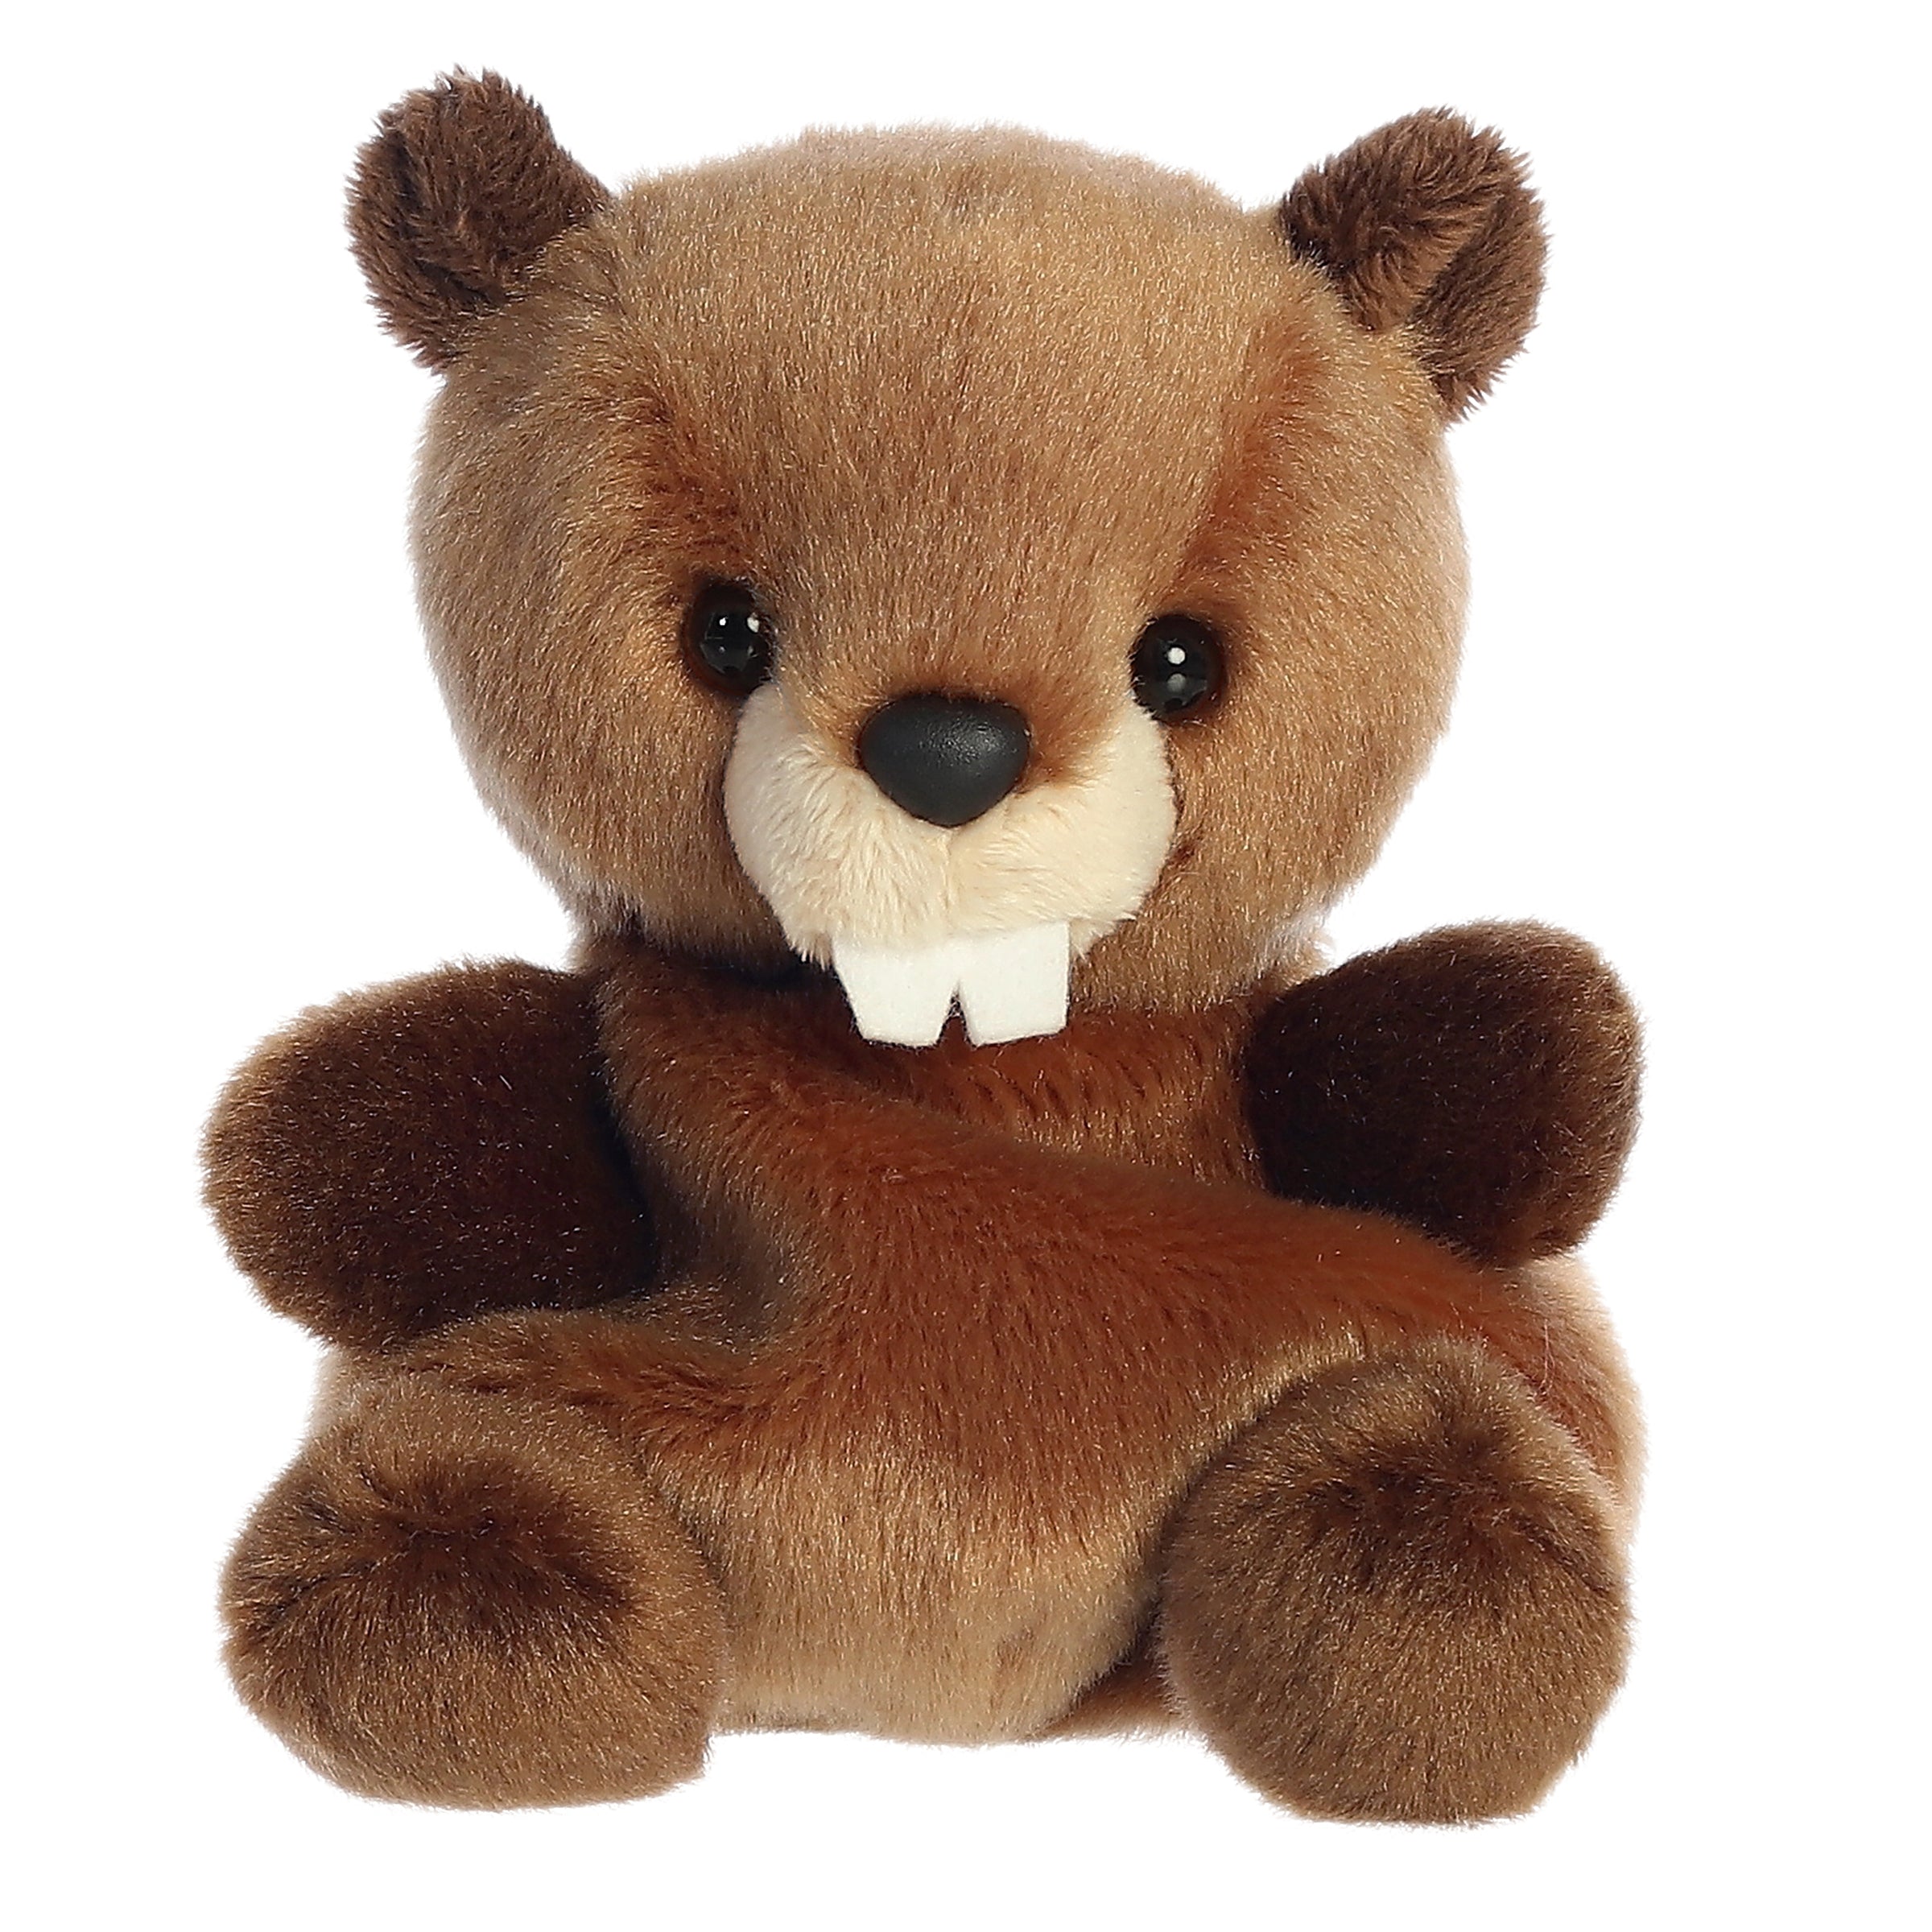 Chewy Beaver plush from Palm Pals, featuring soft brown fur and beaver teeth, it resembles a real-life beaver!